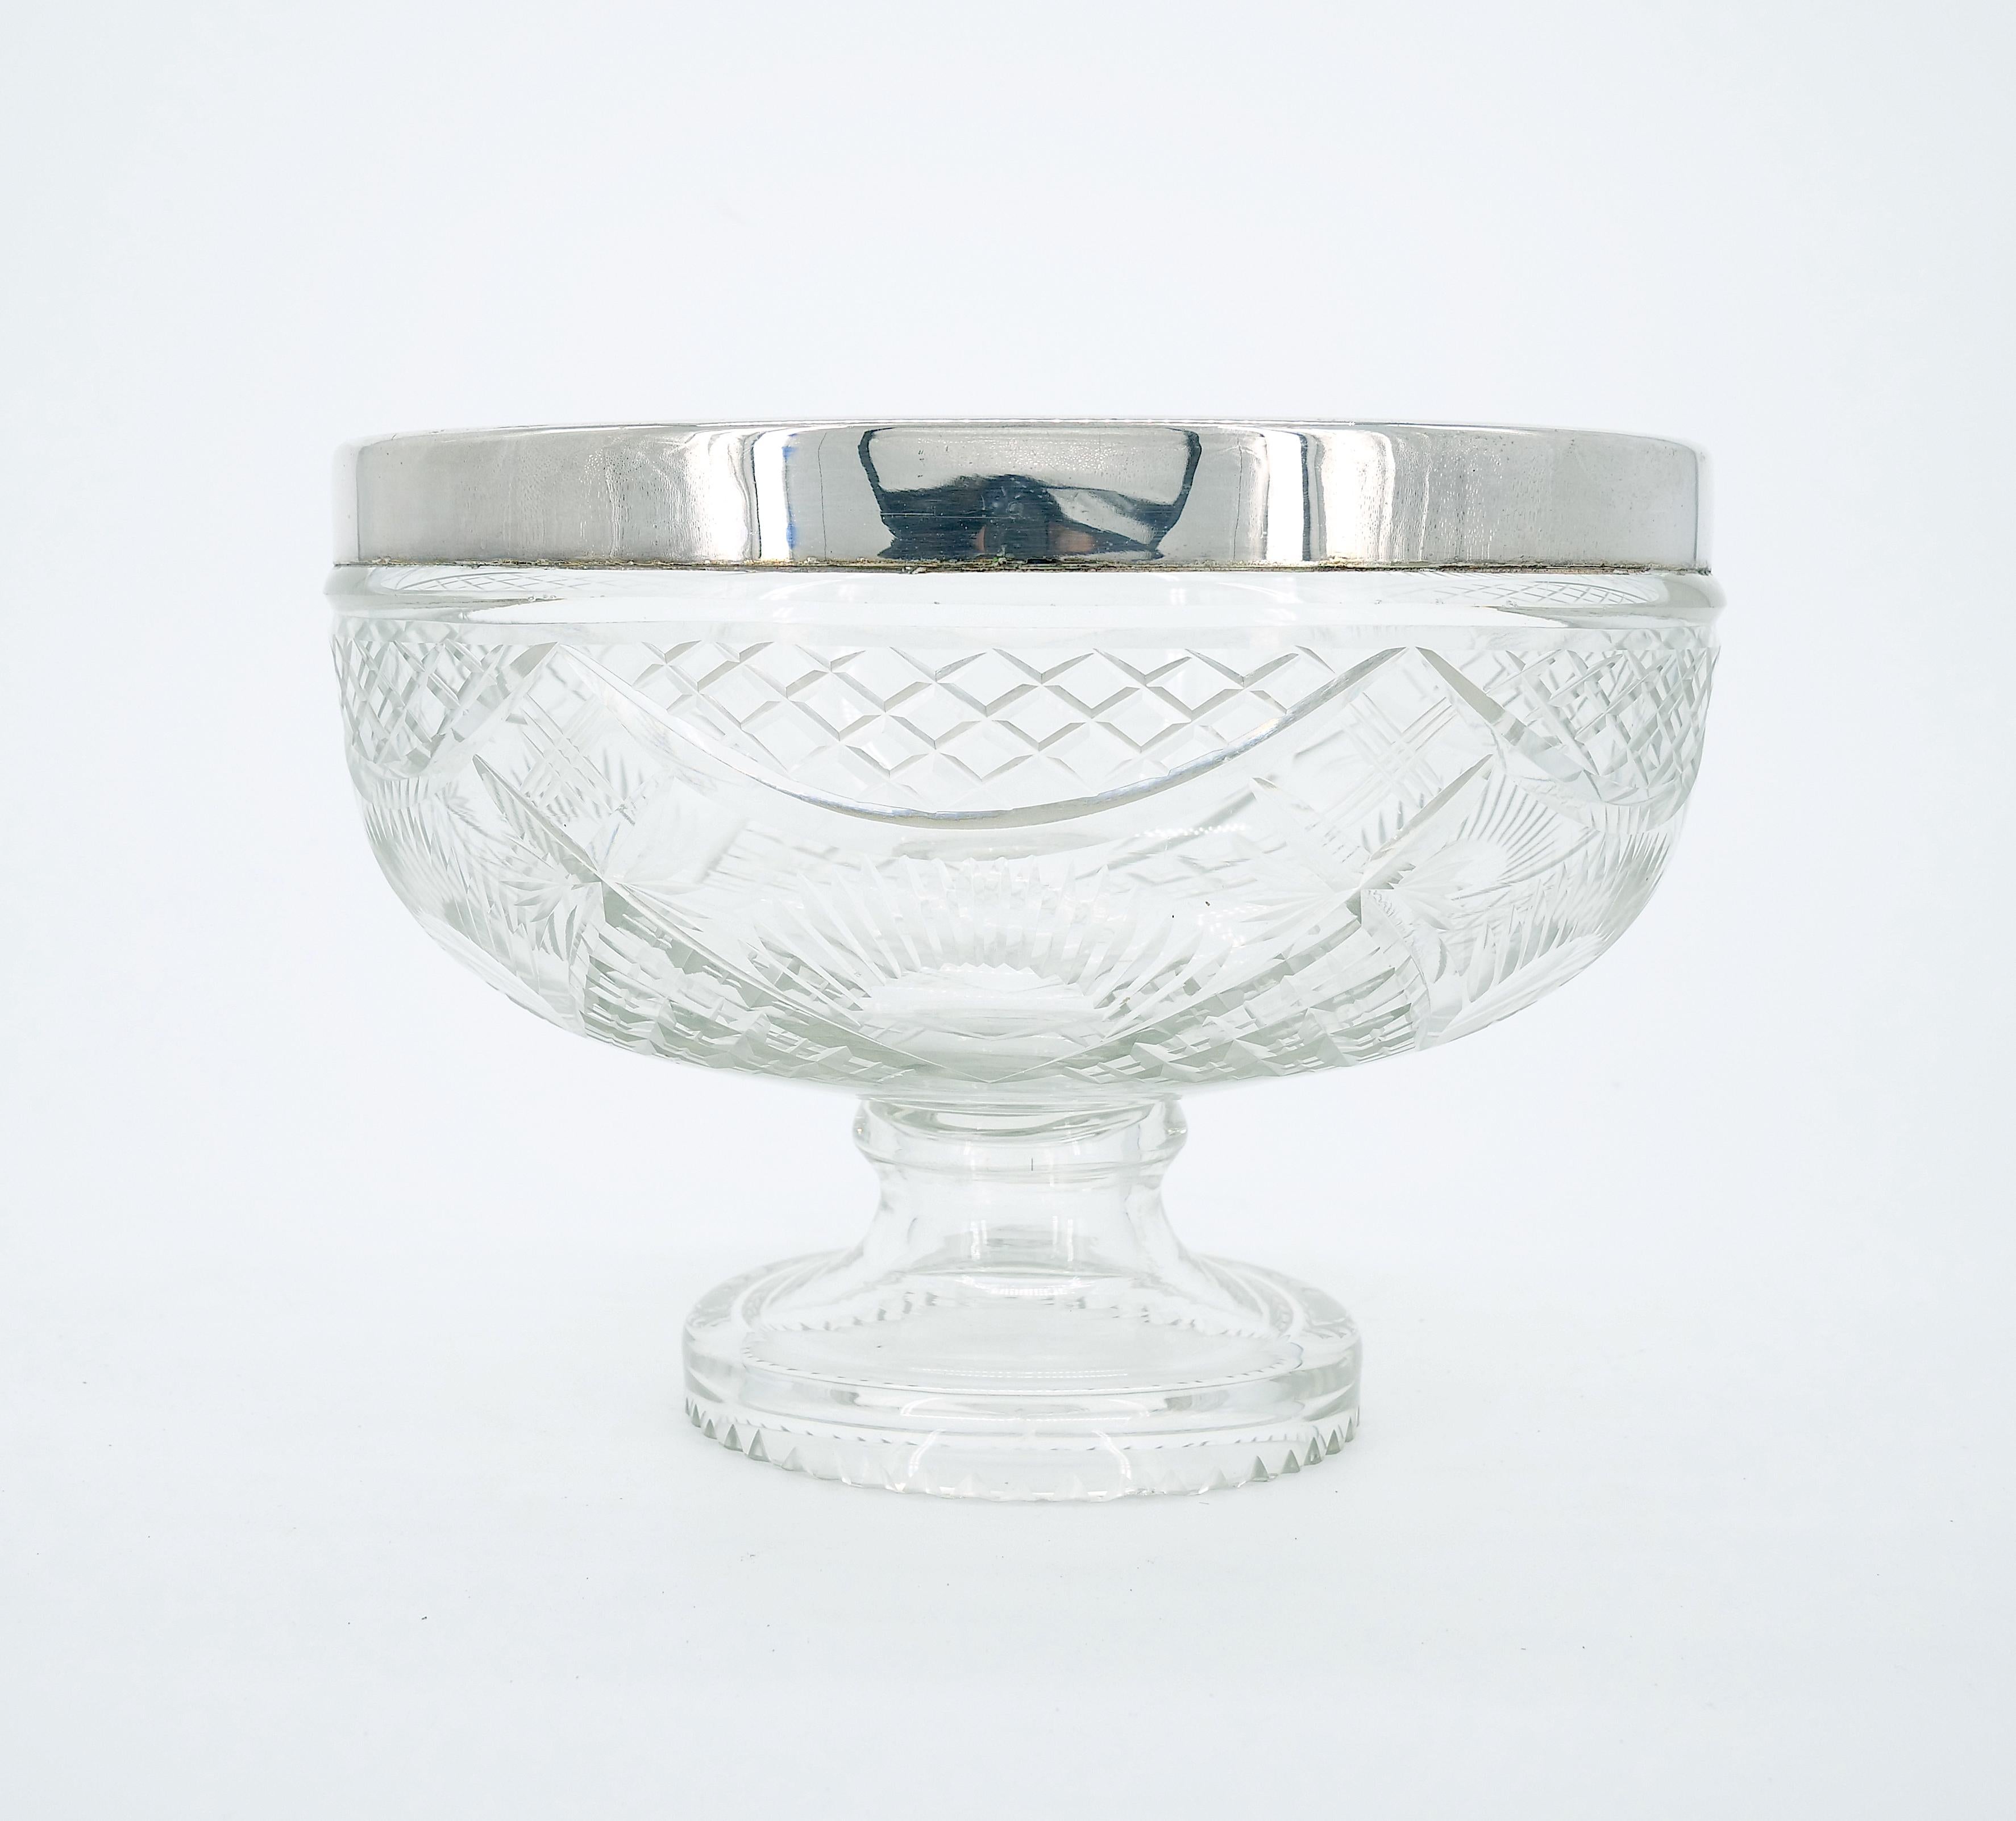 Enhance your table setting with this vintage English Silver Plate Framed Top Cut Glass Serving Bowl by E.P.N.S., a stunning combination of craftsmanship and timeless design. The exterior of the bowl is adorned with intricate diamond-cut details,